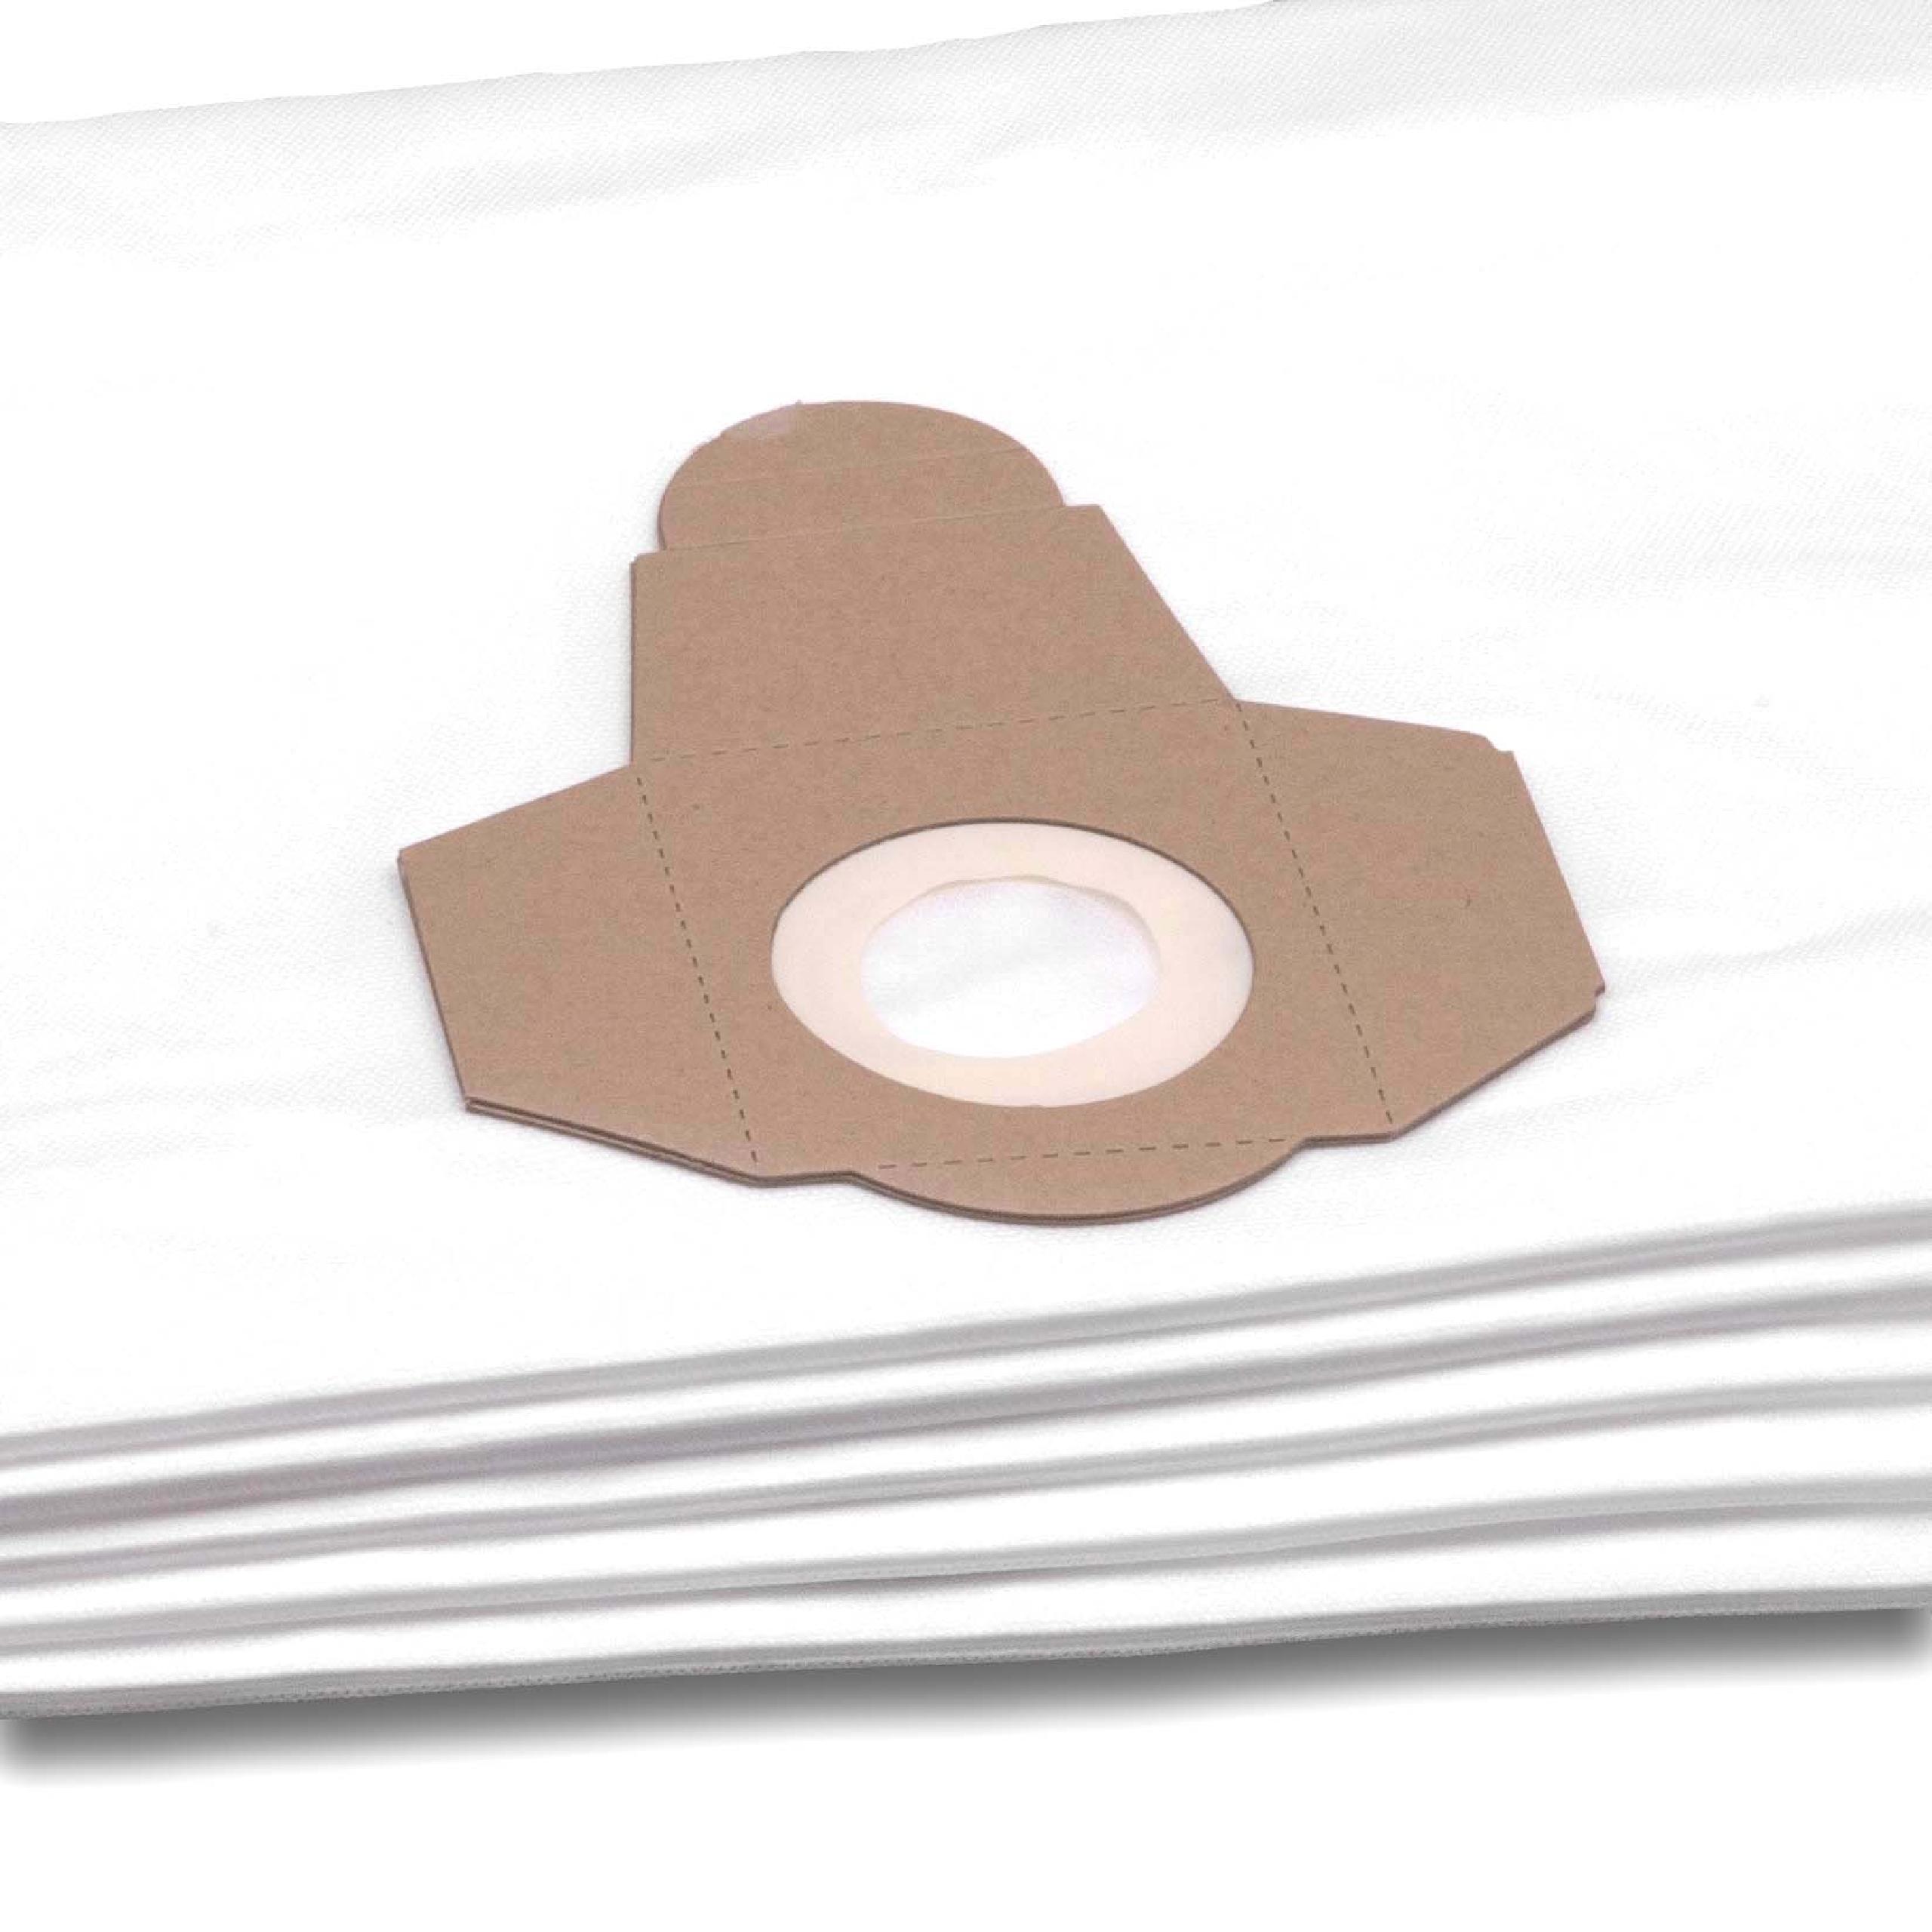 10x Vacuum Cleaner Bag replaces Siemens Typ W for Moulinex - microfleece